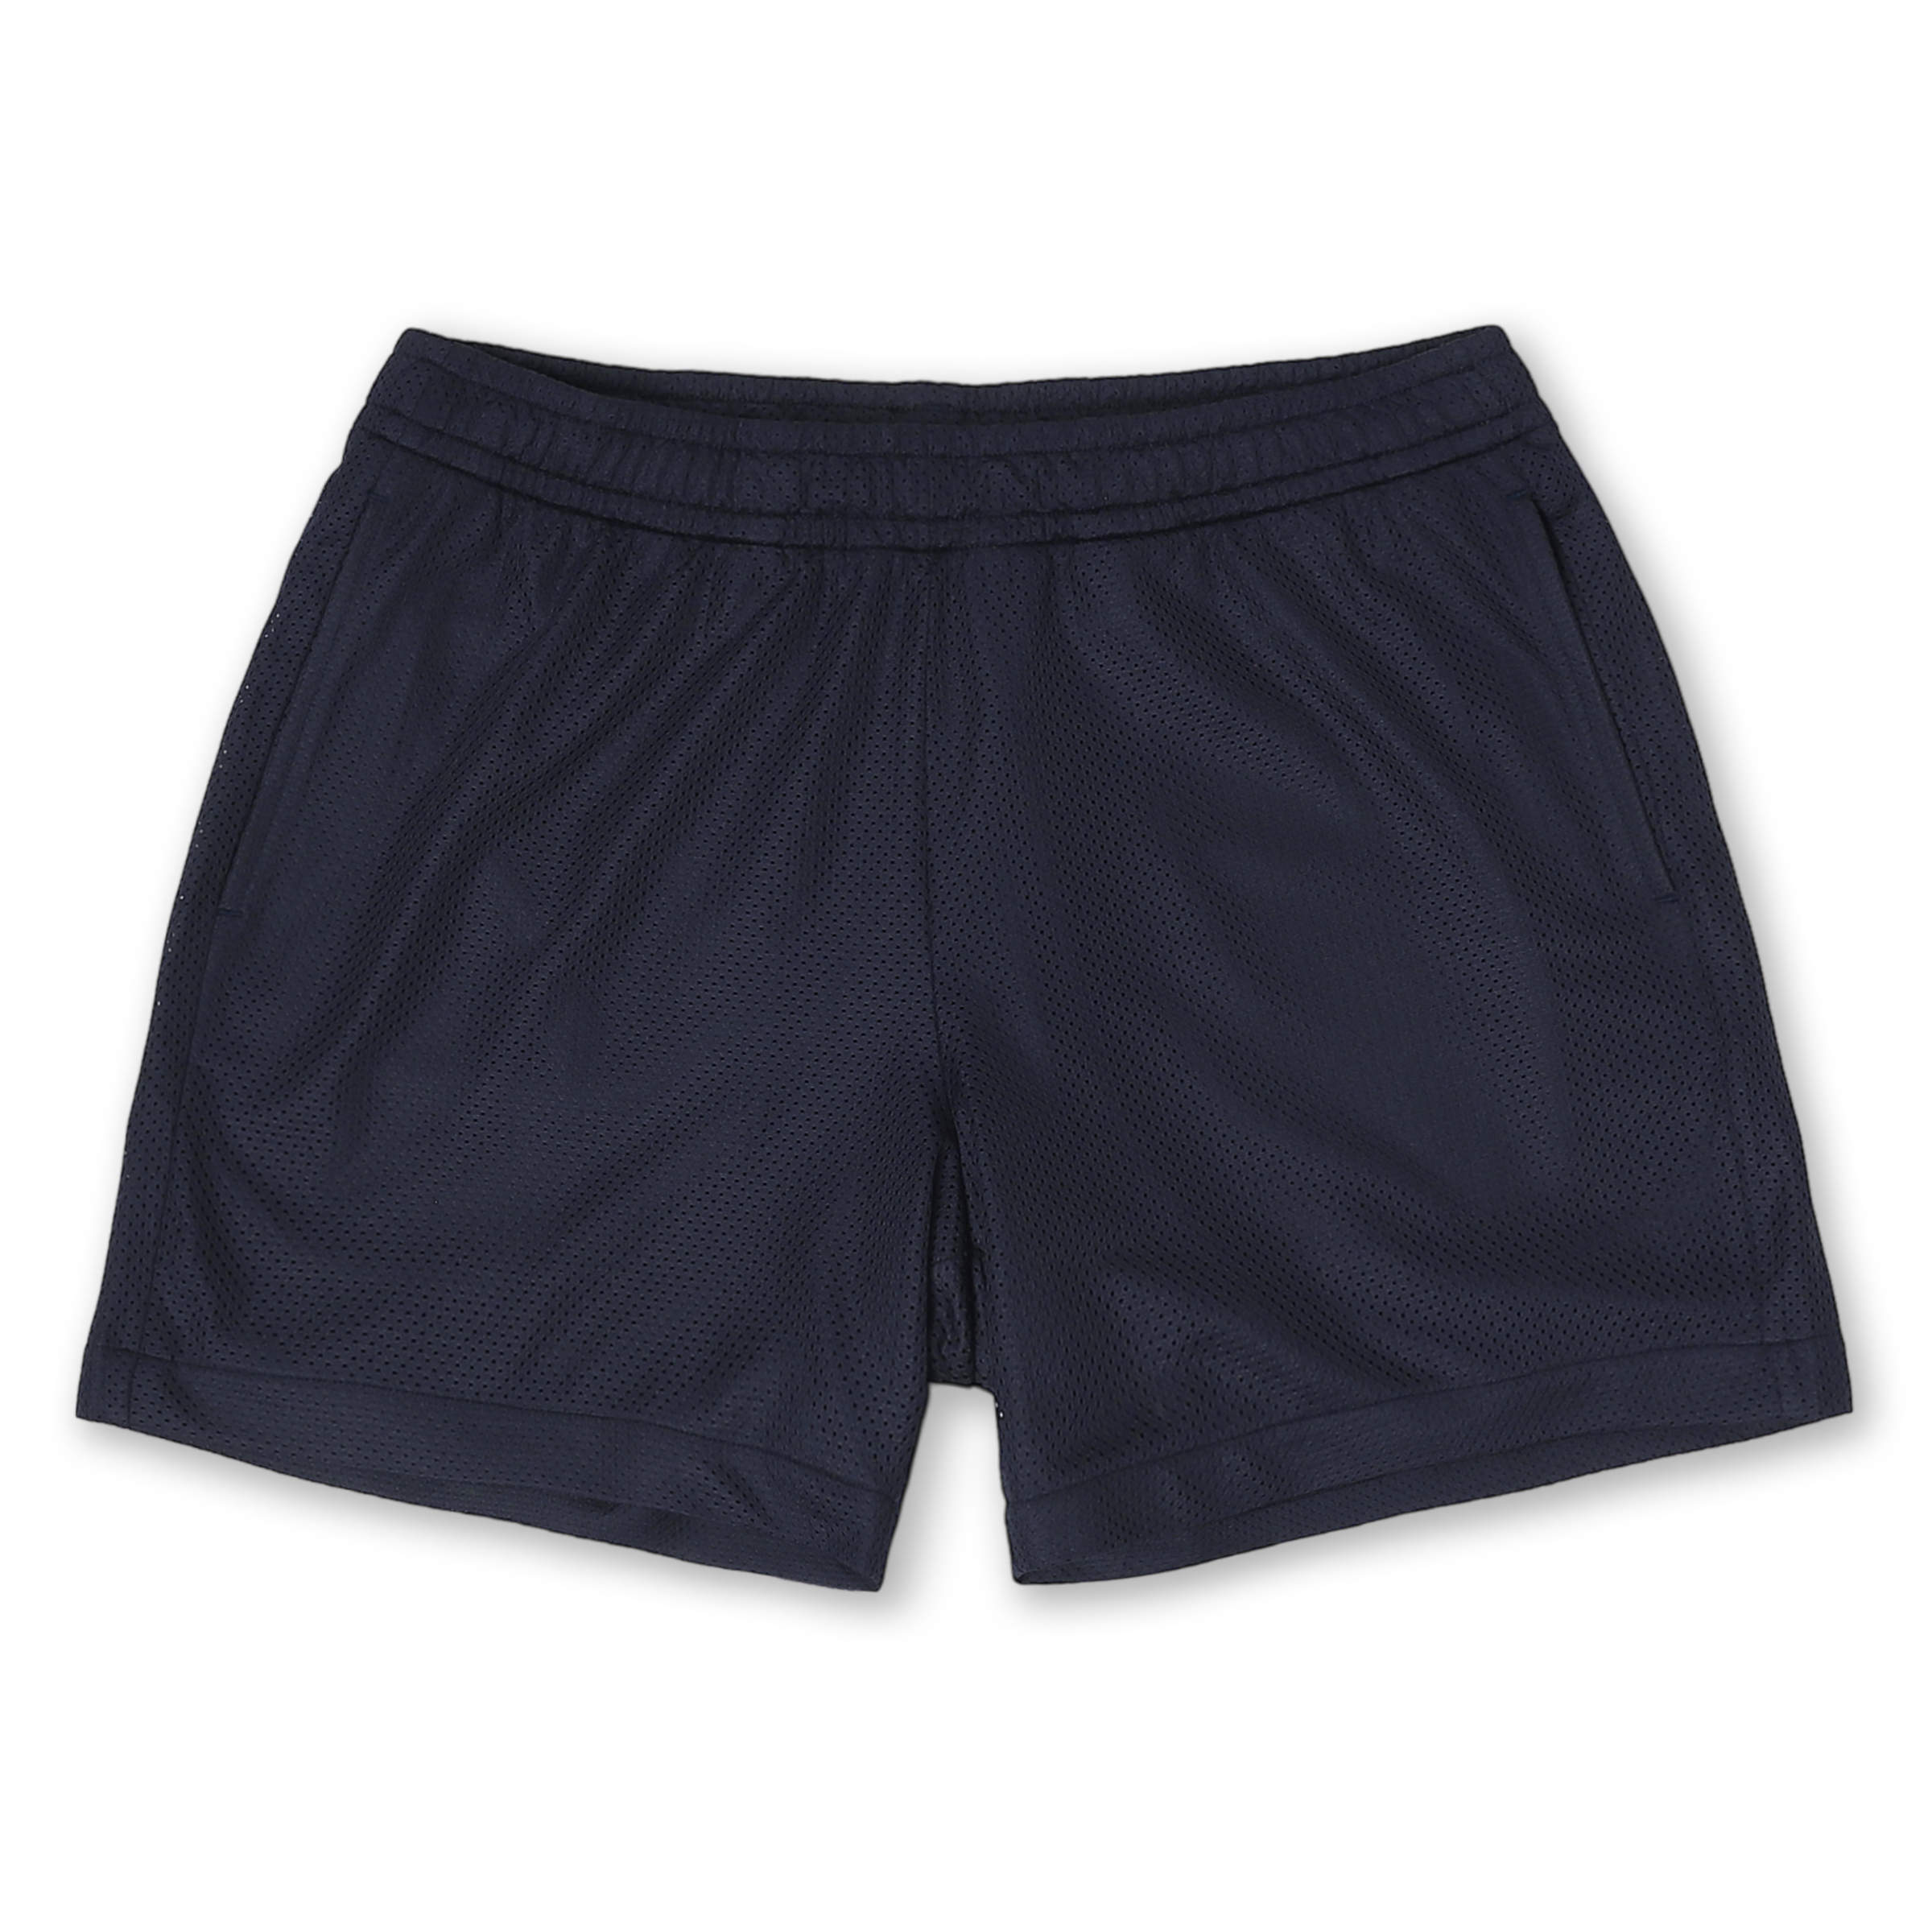 Mesh Short 5.5" Navy with elastic waistband, two side seam pockets, and black drawstring